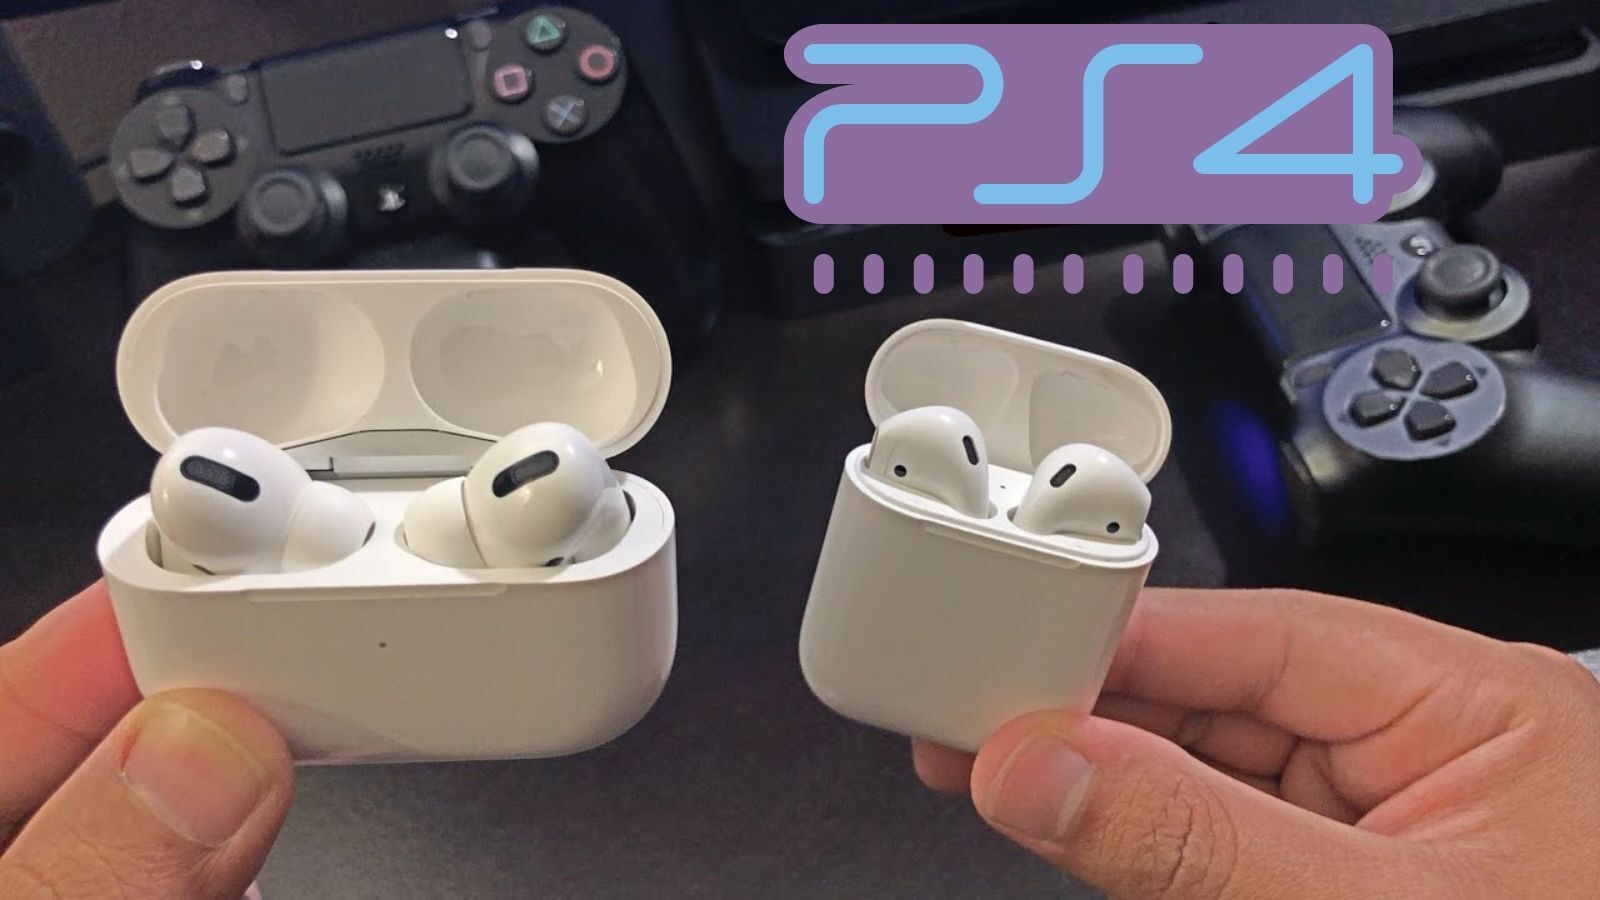 How to Connect Airpods to PS4? (Here's the Solution)